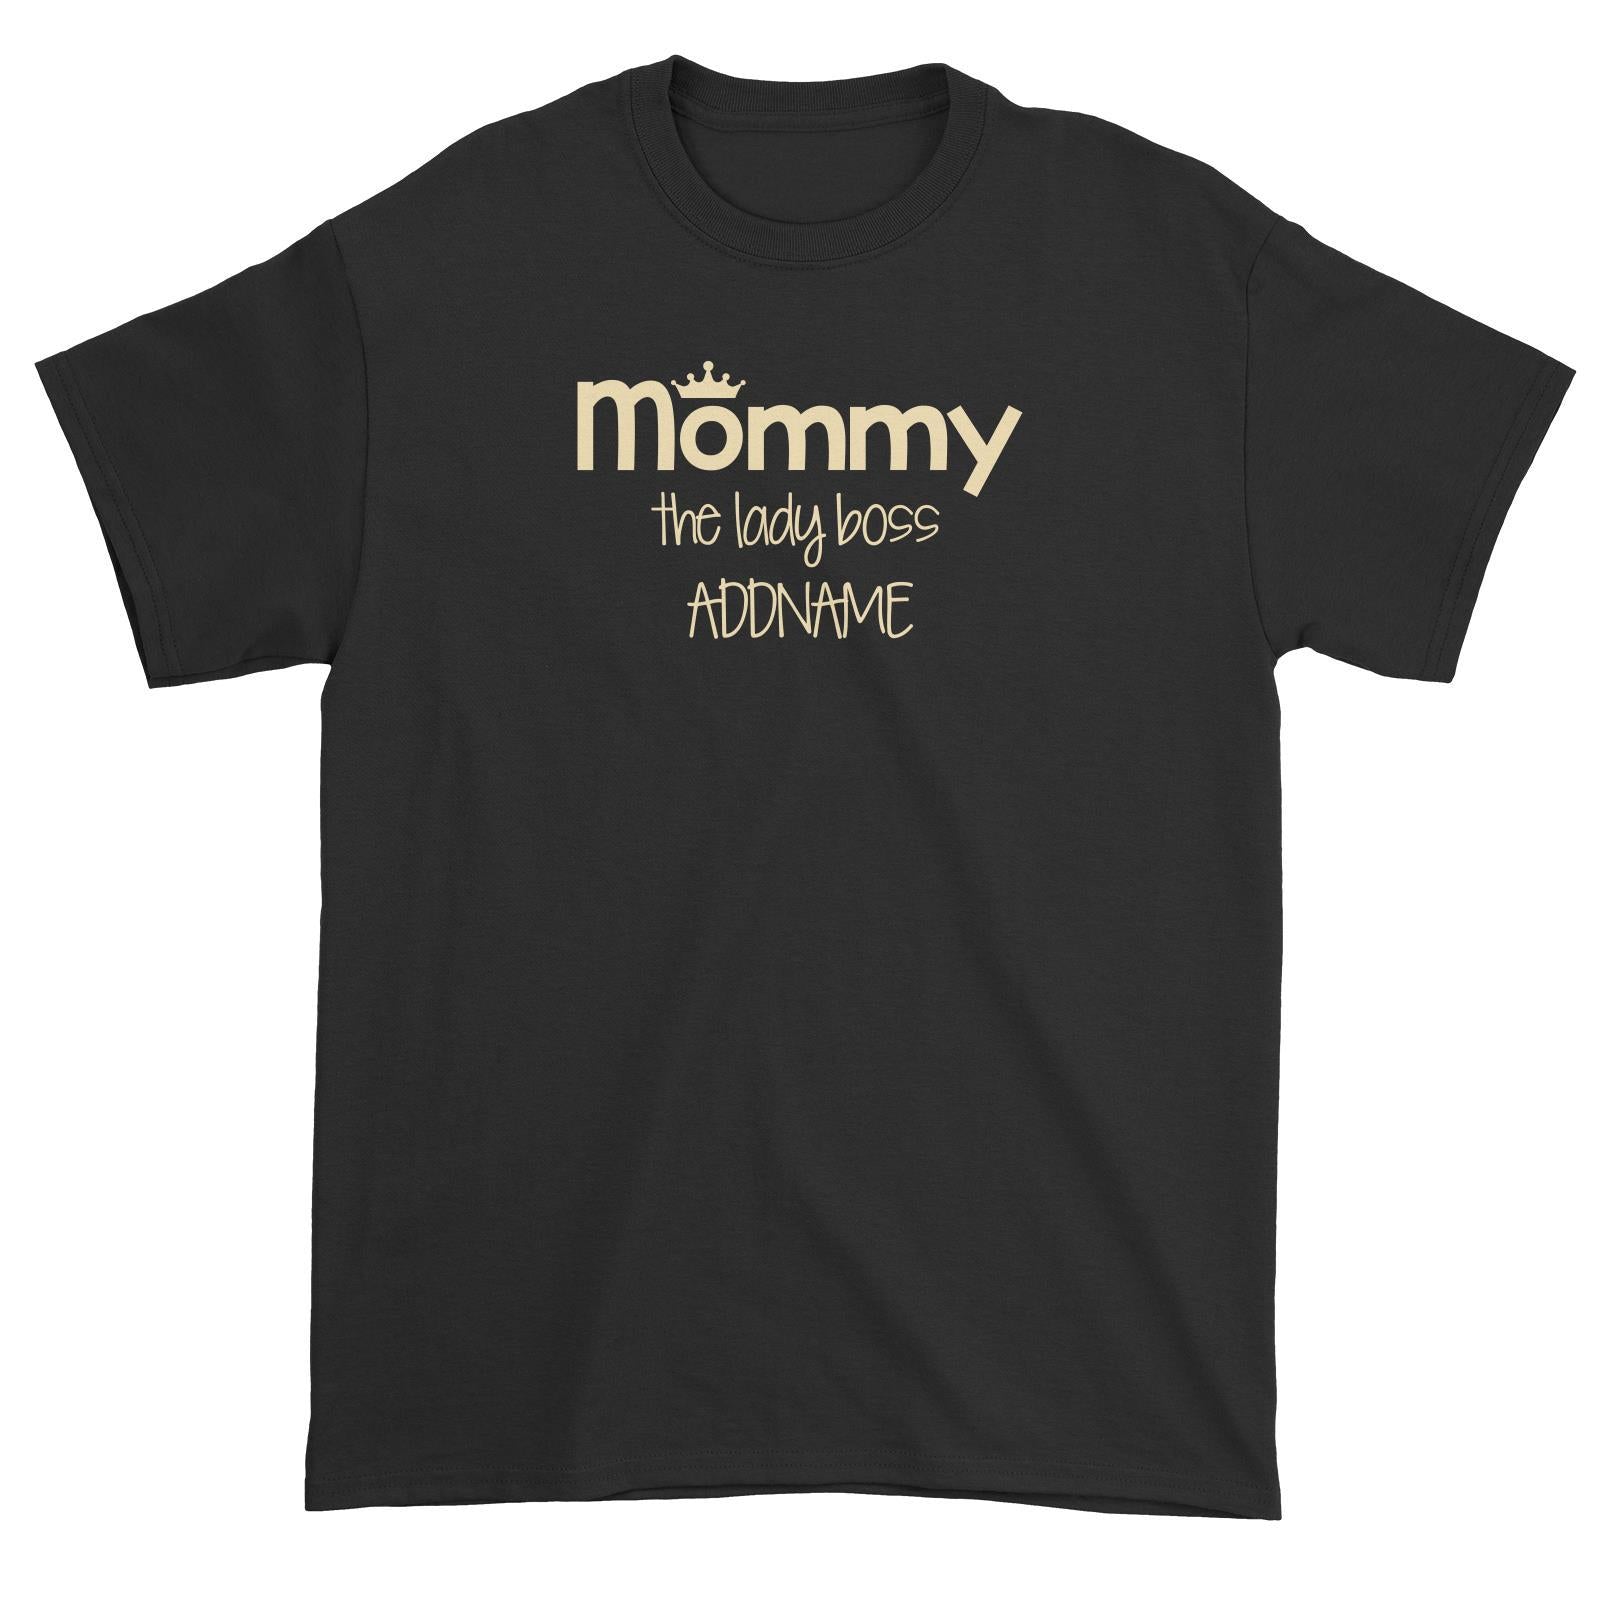 Mommy with Tiara The Lady Boss Unisex T-Shirt